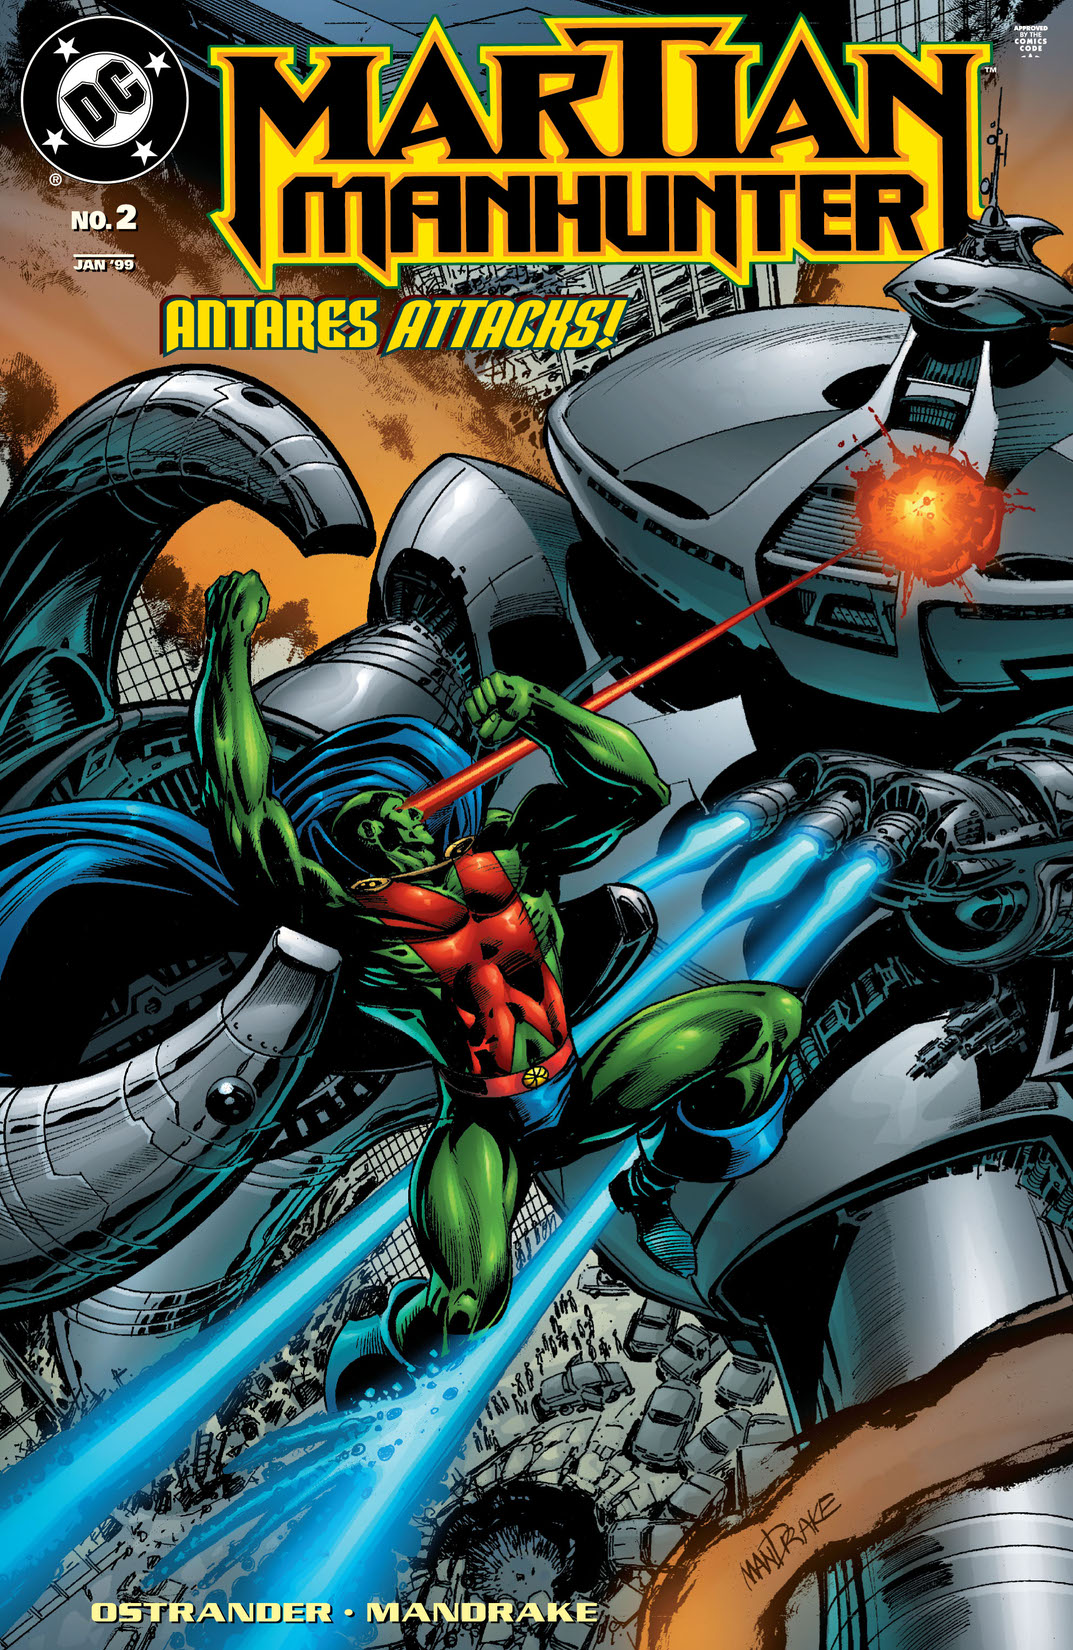 Martian Manhunter (1998-) #2 preview images